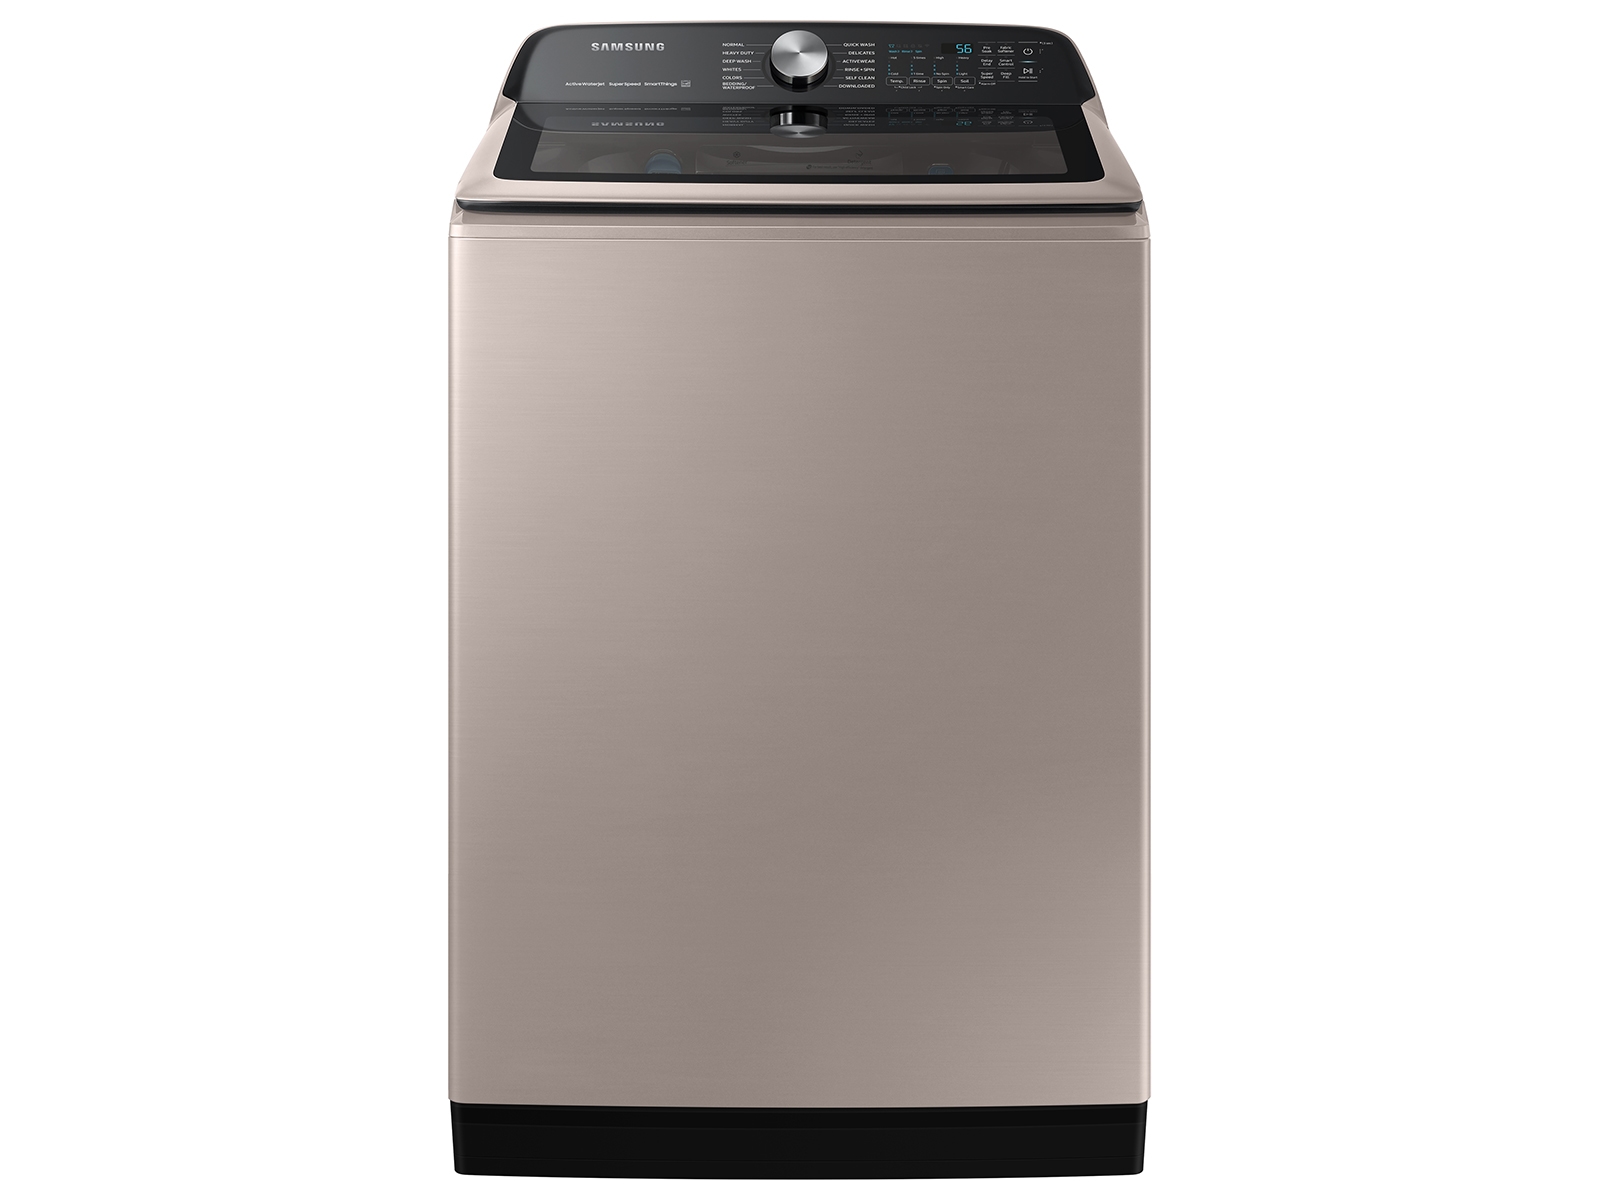 Samsung 5.2 cu. ft. Large Capacity Smart Top Load Washer with Super Speed Wash in Champagne(WA52A5500AC/US)